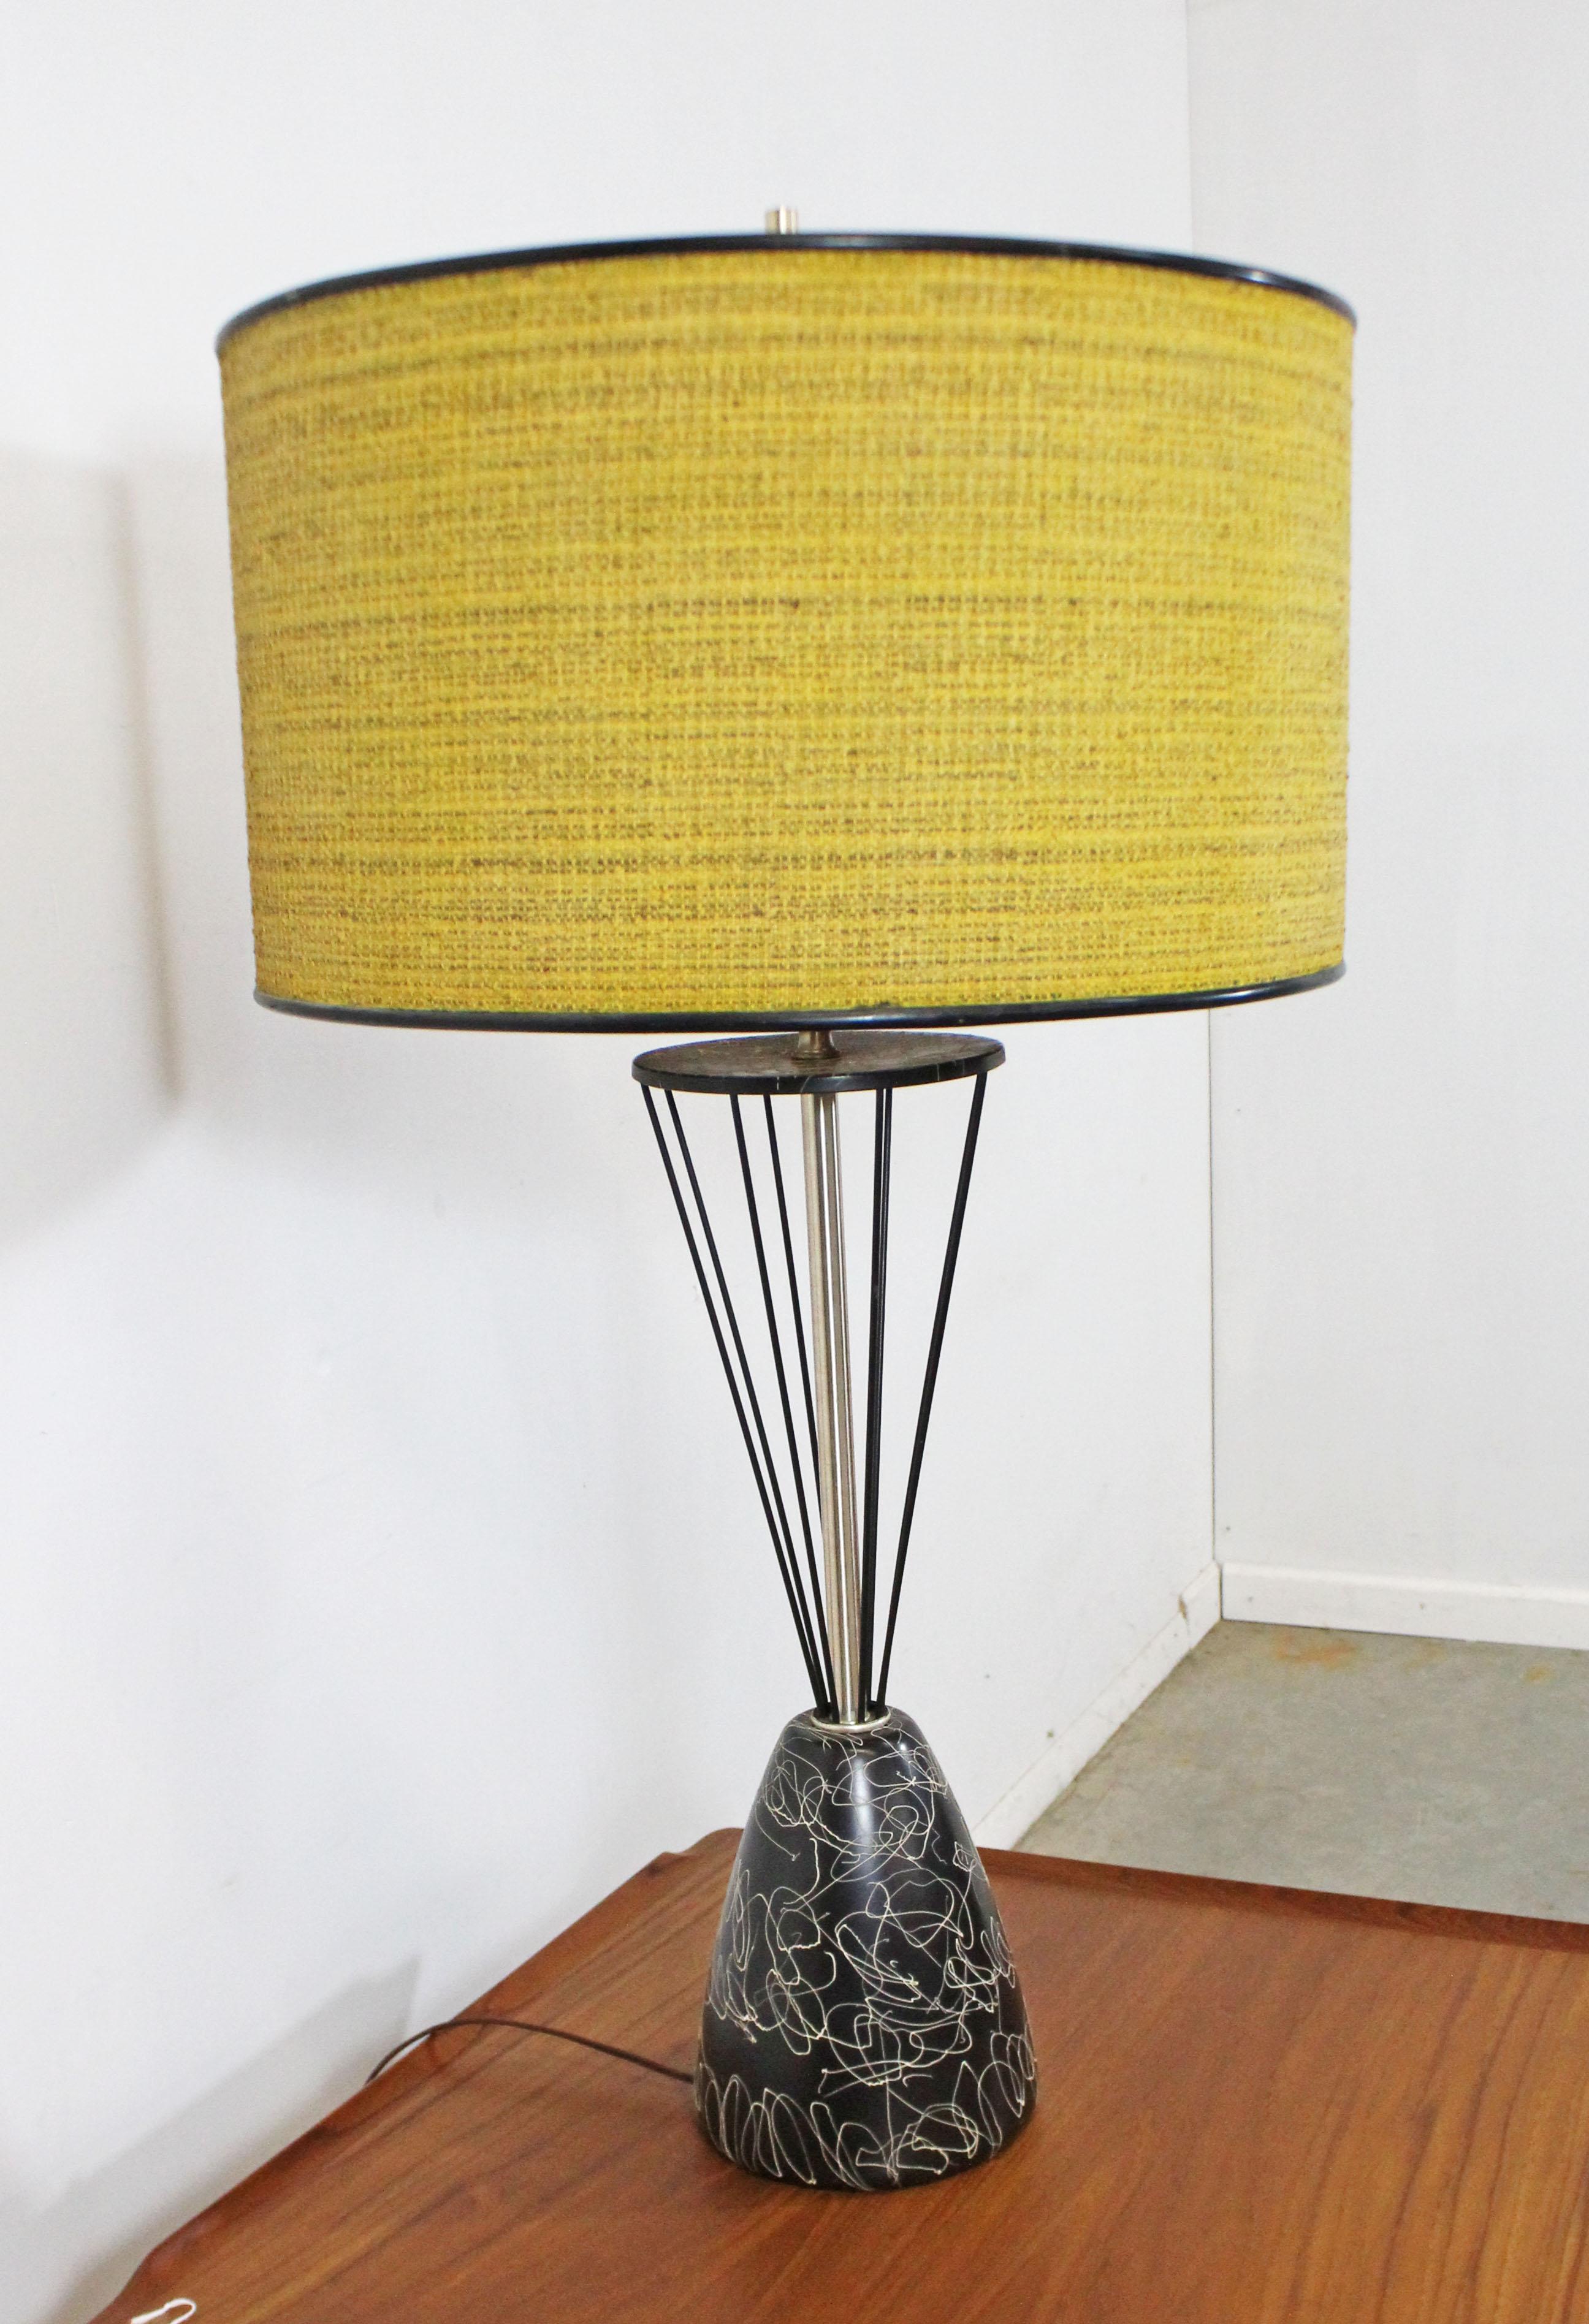 Offered is a one of a kind custom made Mid-Century Modern table lamp with a caged wire-base and drum shade. This lamp has a painted metal and wire base. The drum shade sits on a glass shade (see photos). In good, working condition, but can stand to